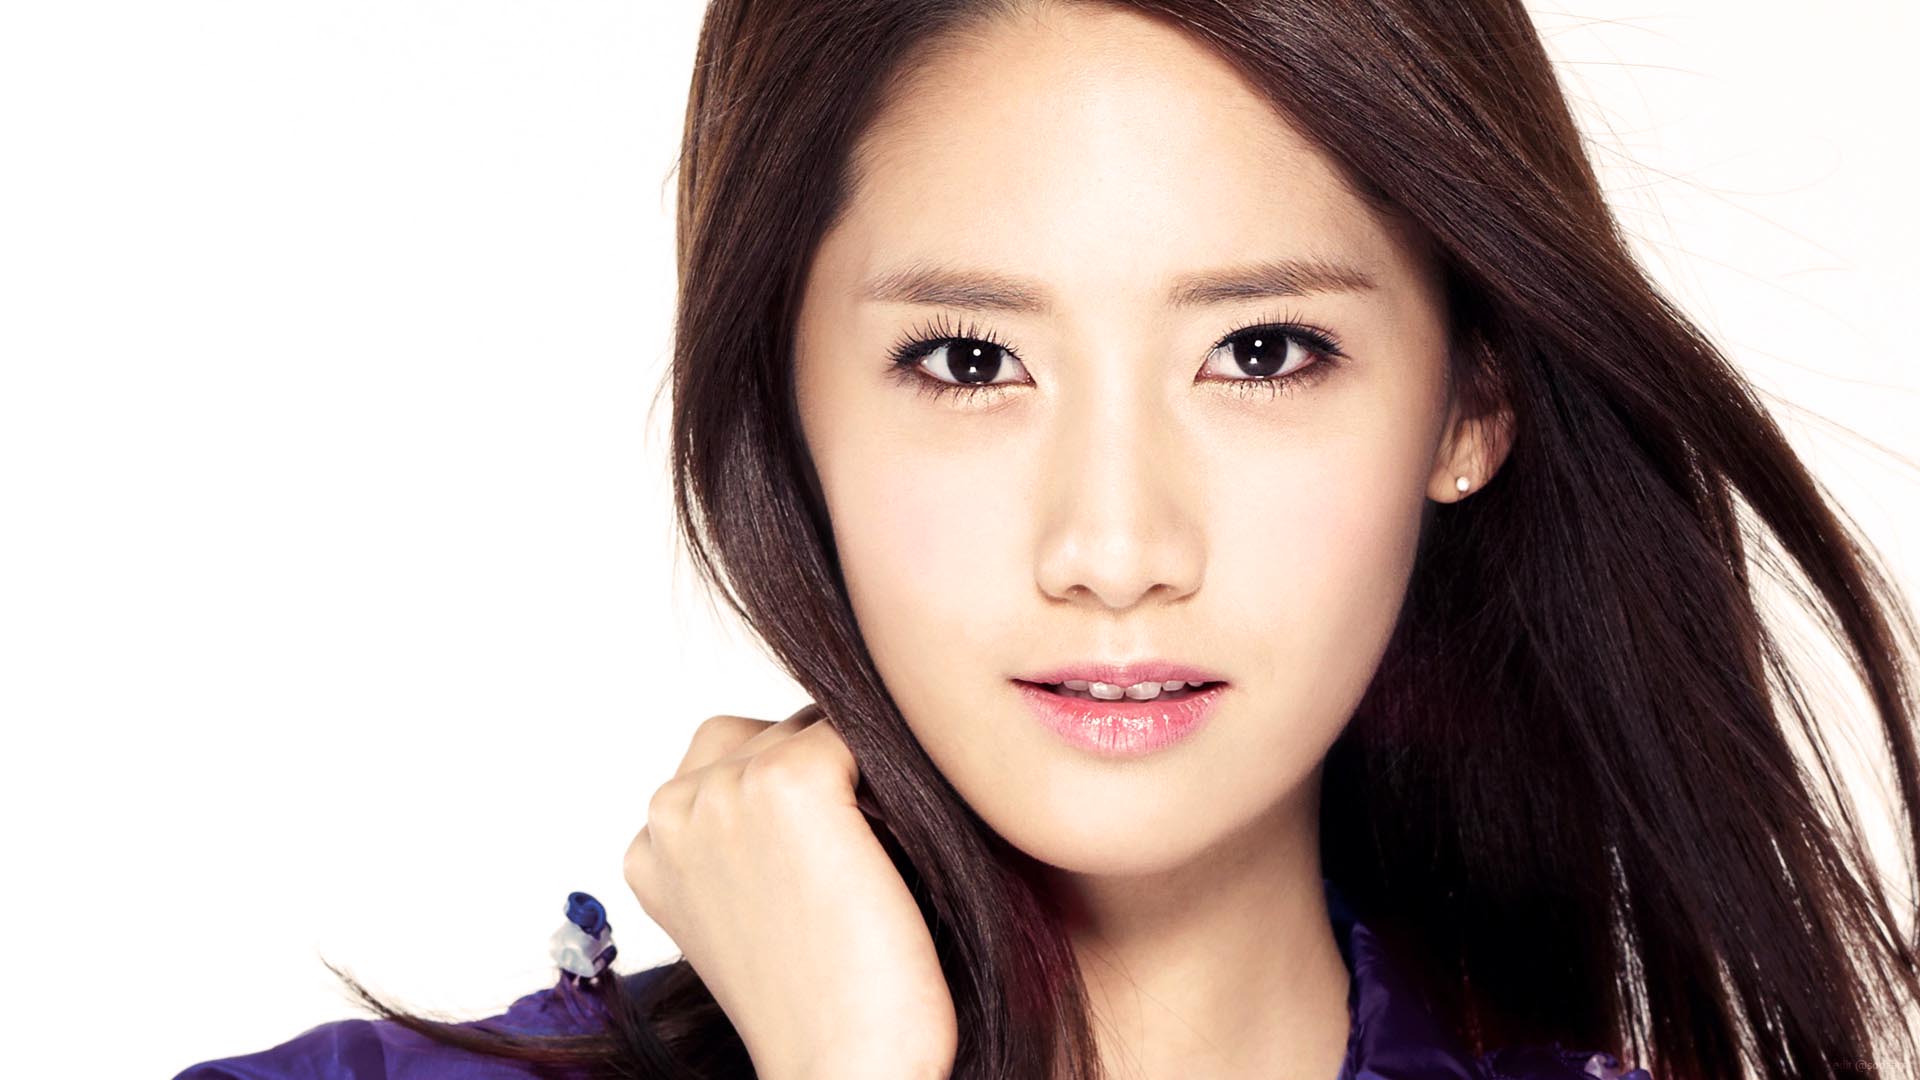 Wallpaper Details File Name Yoona Uploaded By Marilla Date